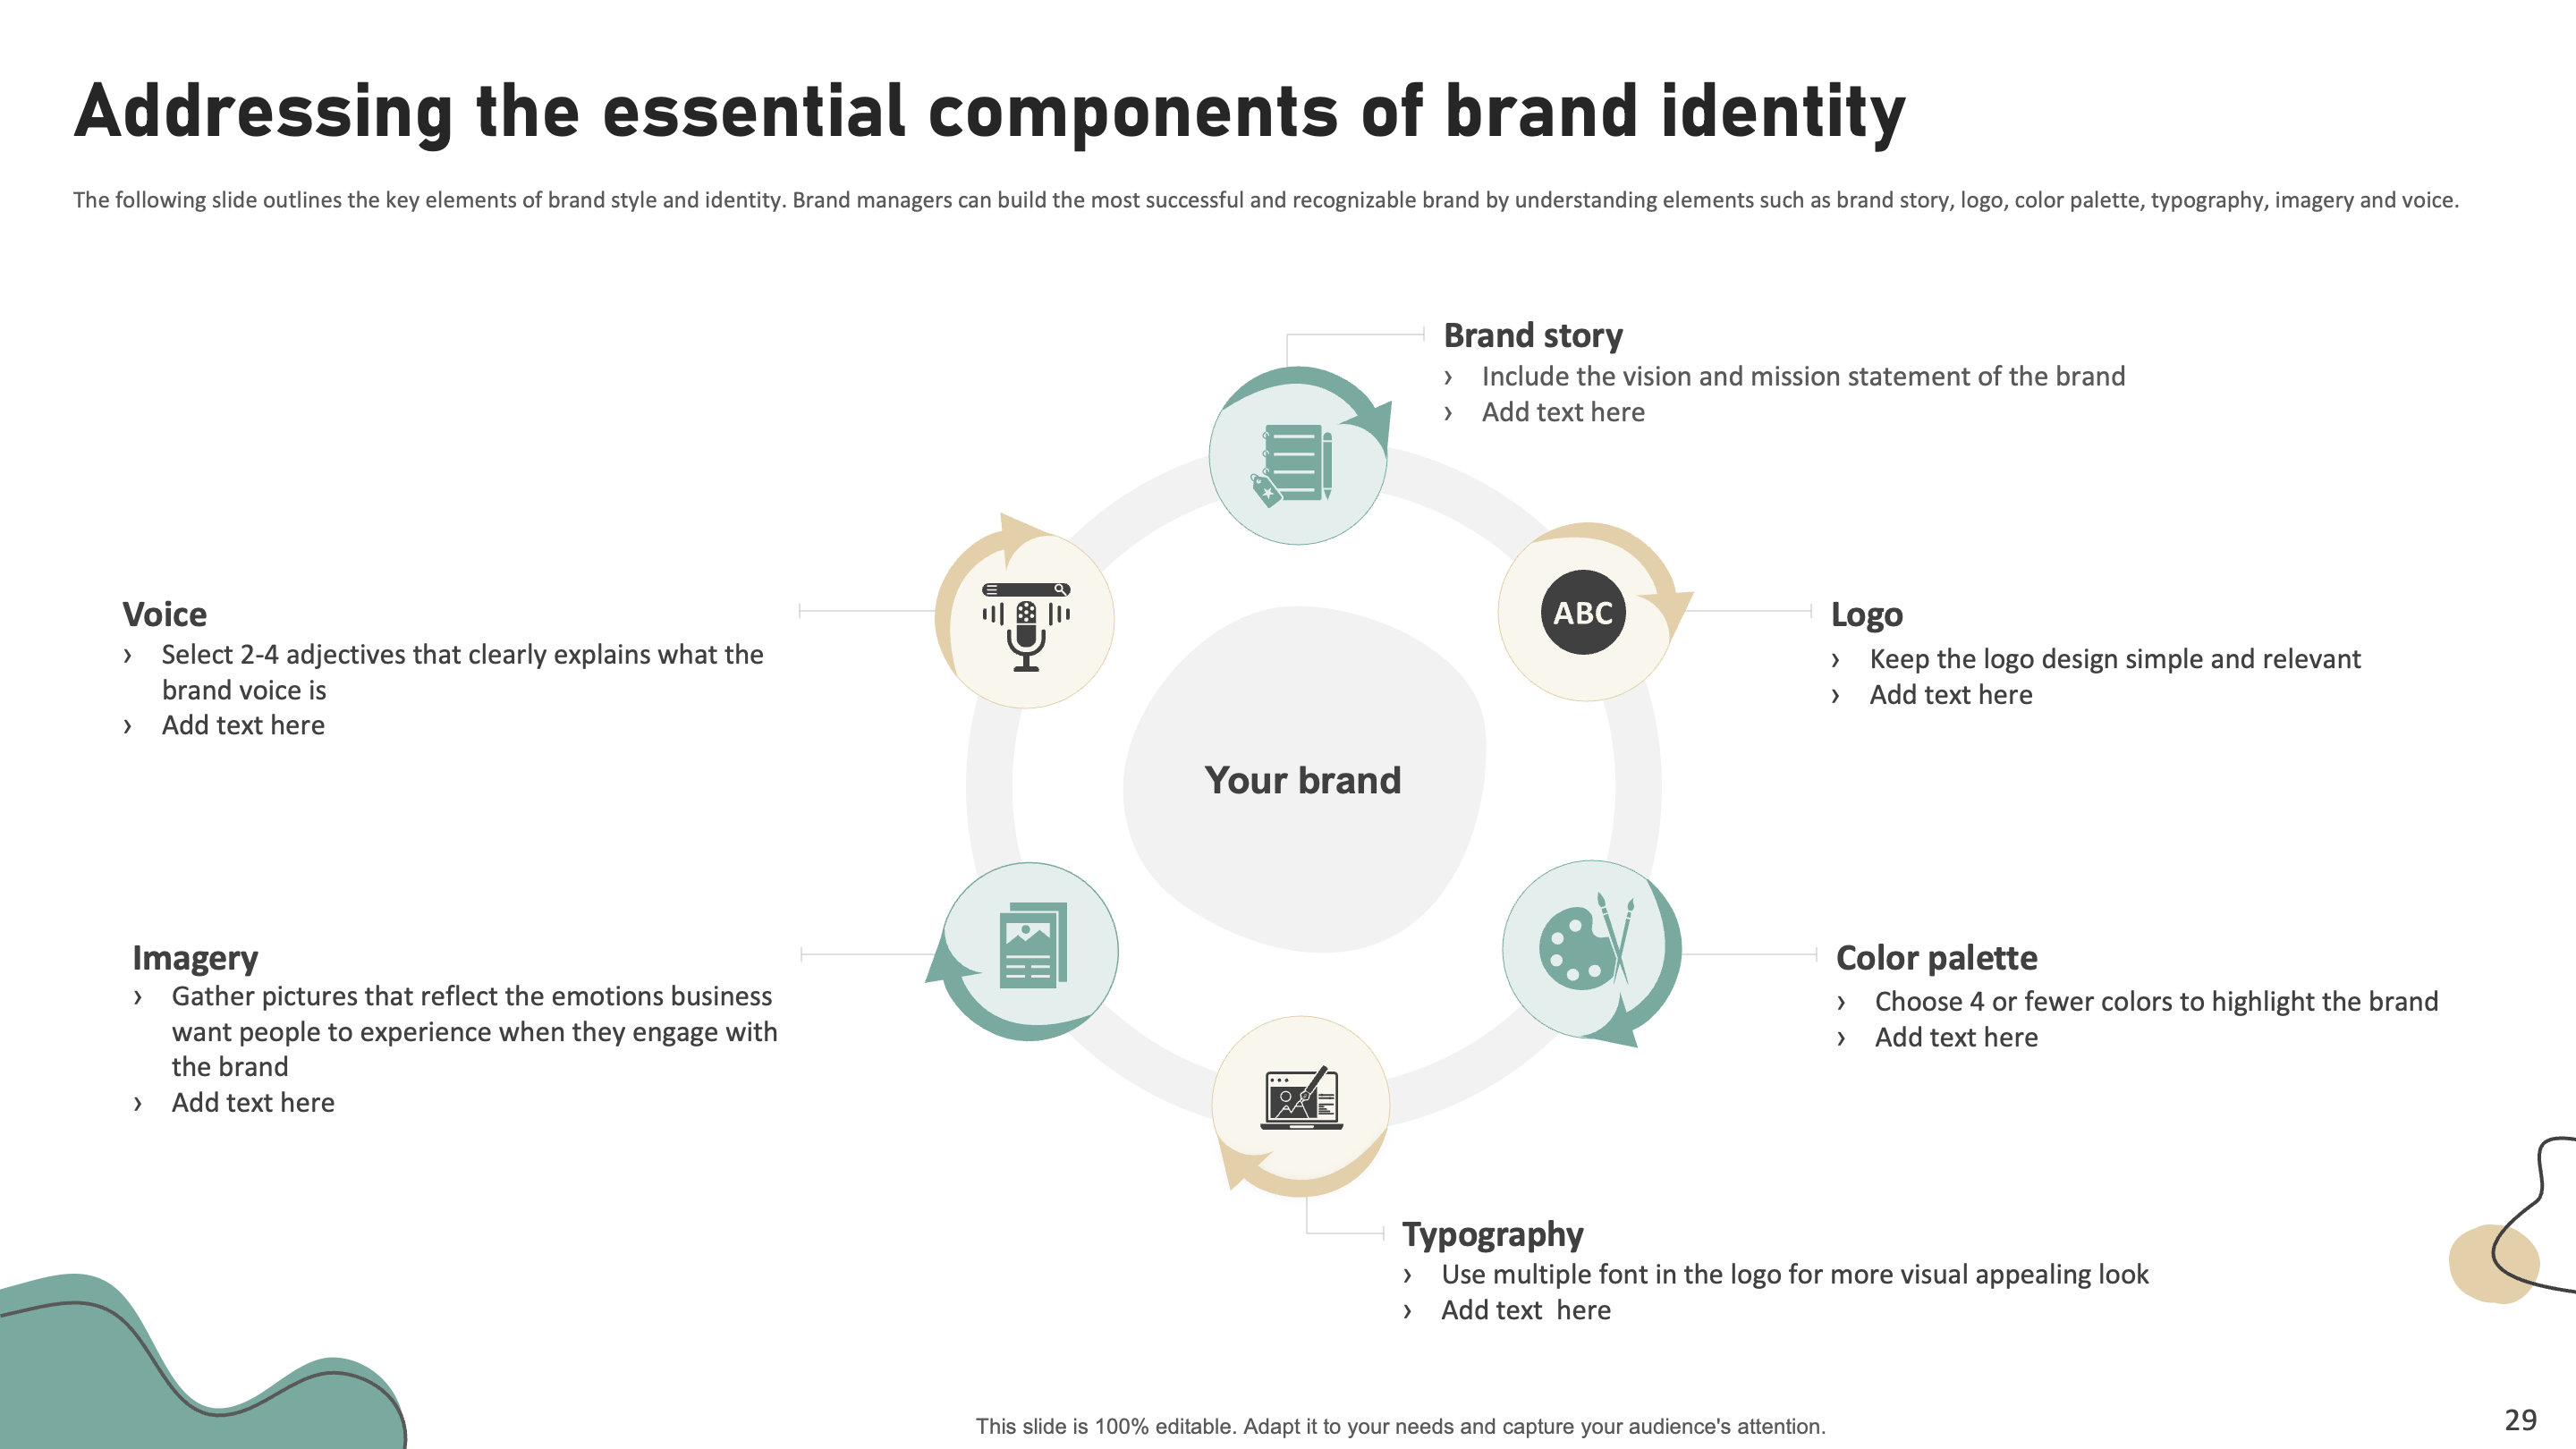 Addressing the Essential Components of Brand Identity